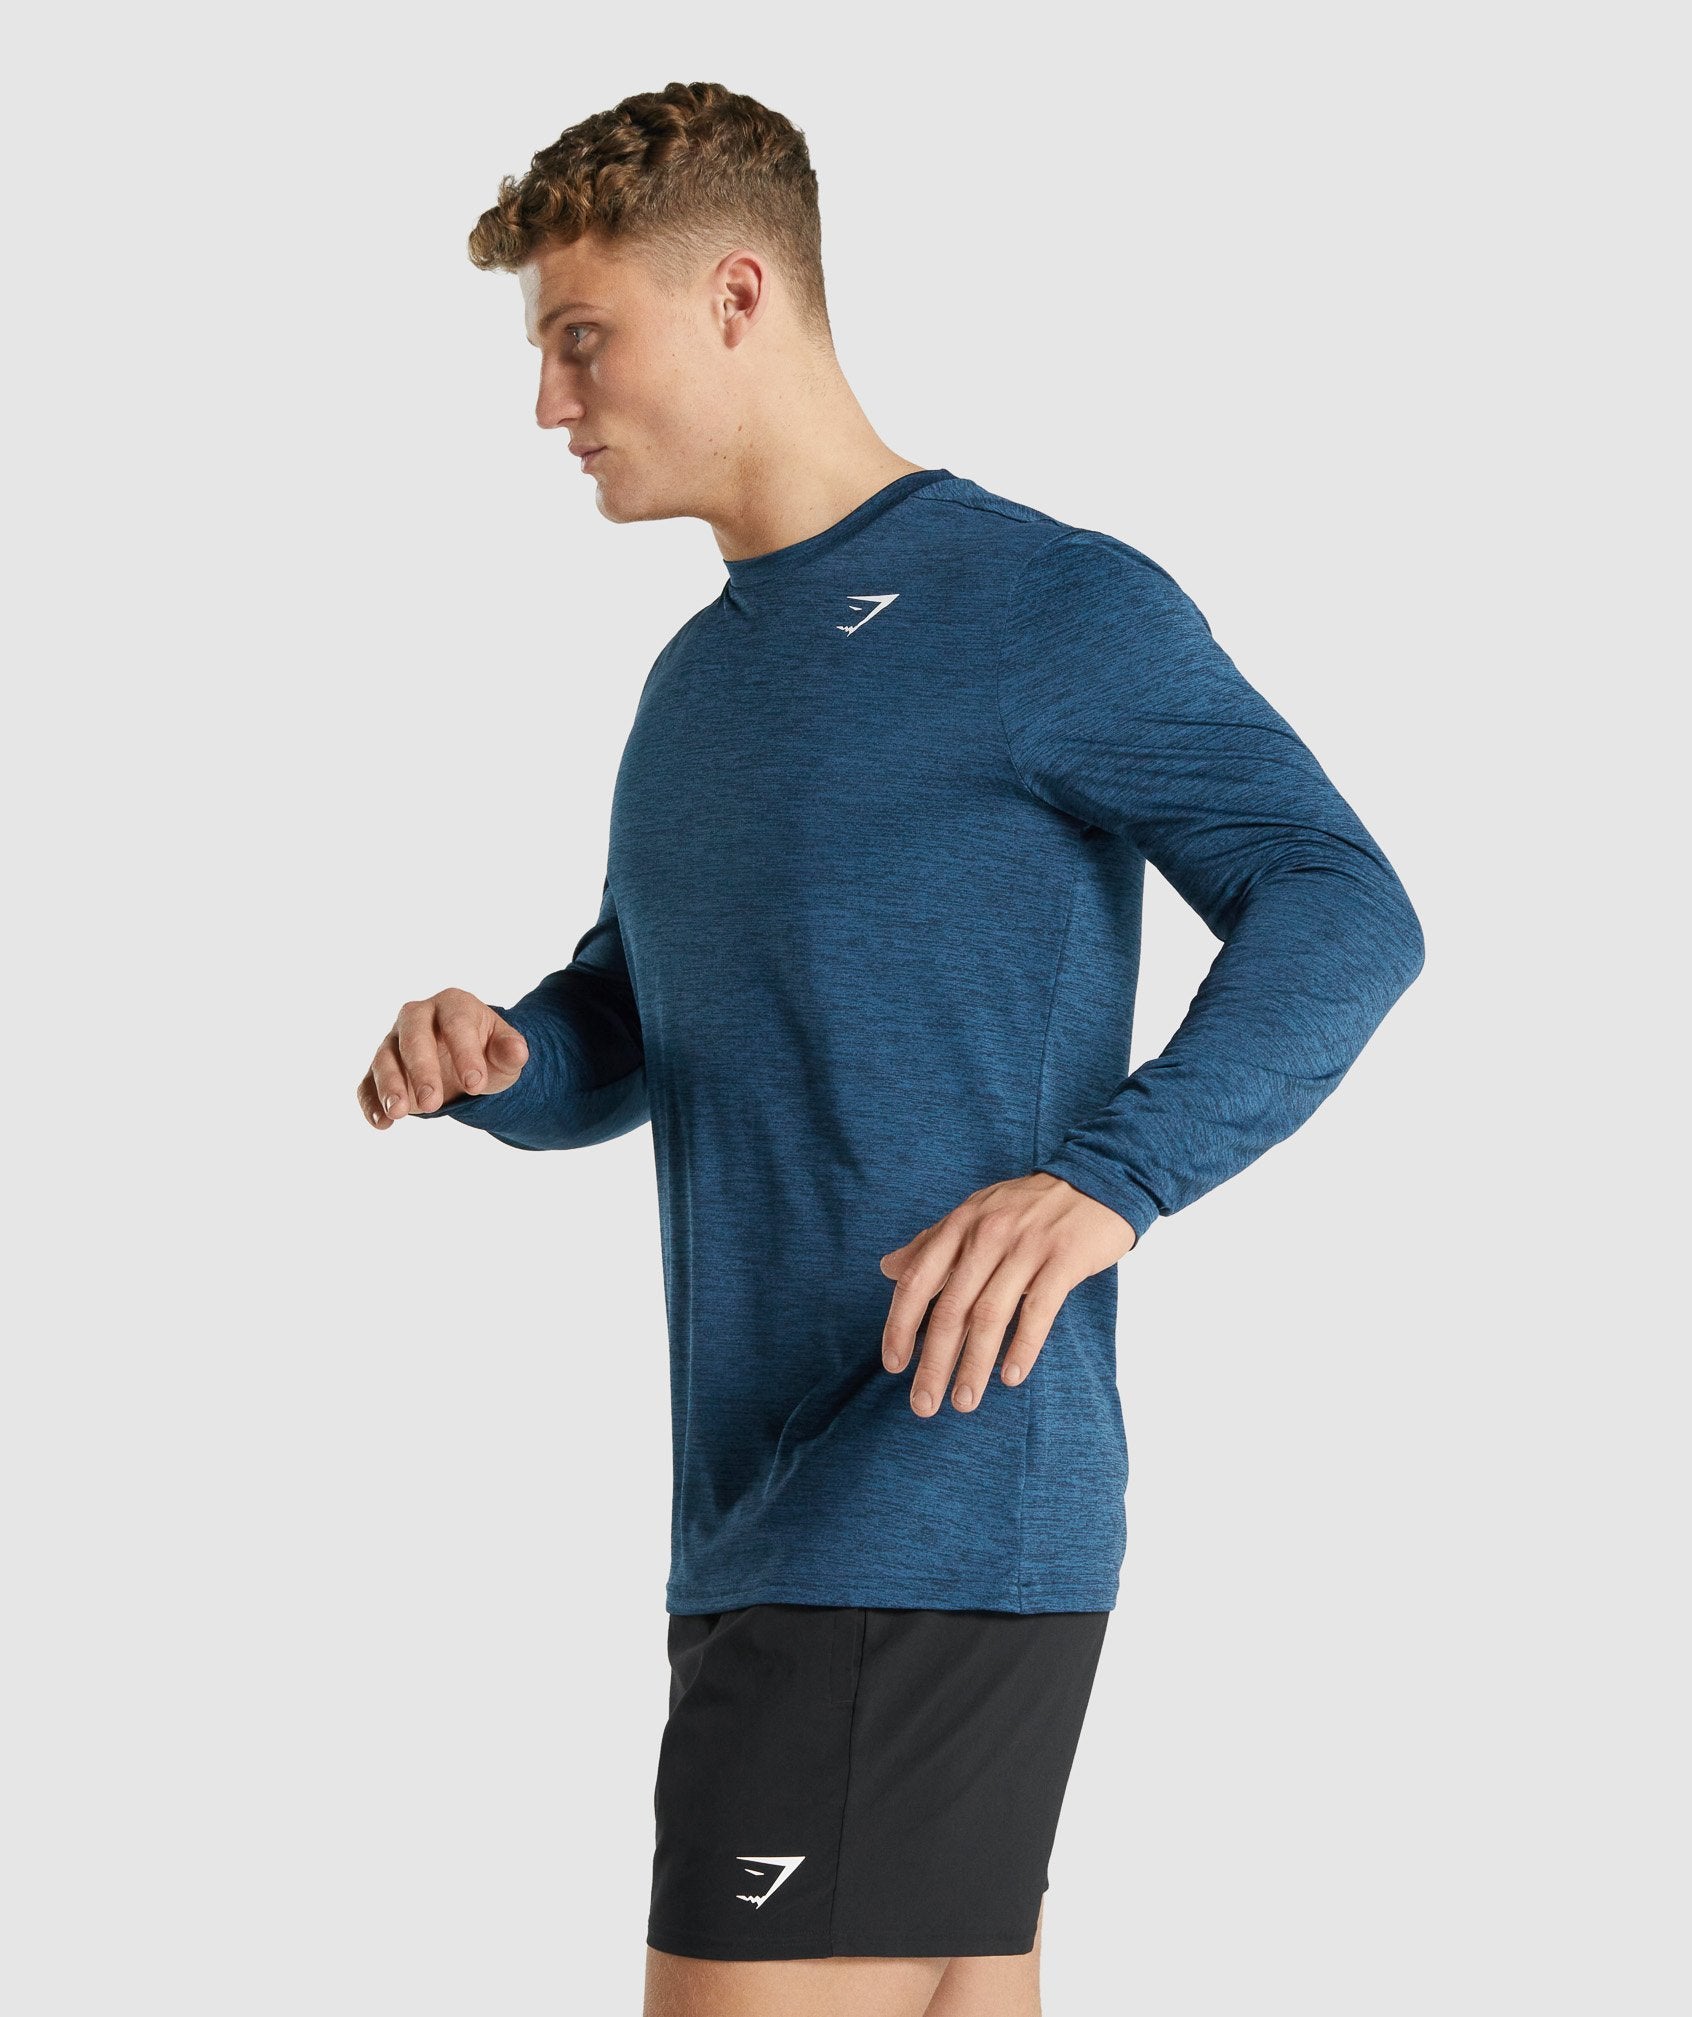 Arrival Marl Long Sleeve T-Shirt in Navy Marl - view 2